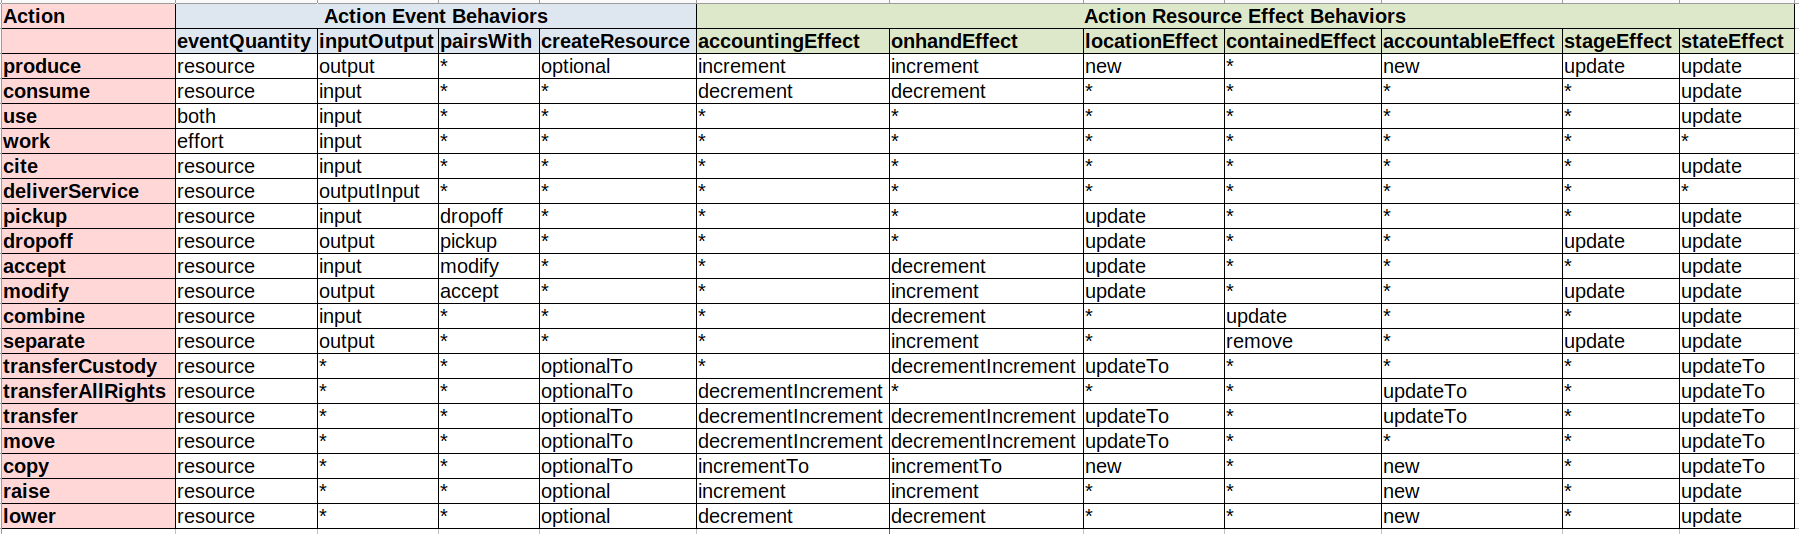 VF actions table with action behaviors